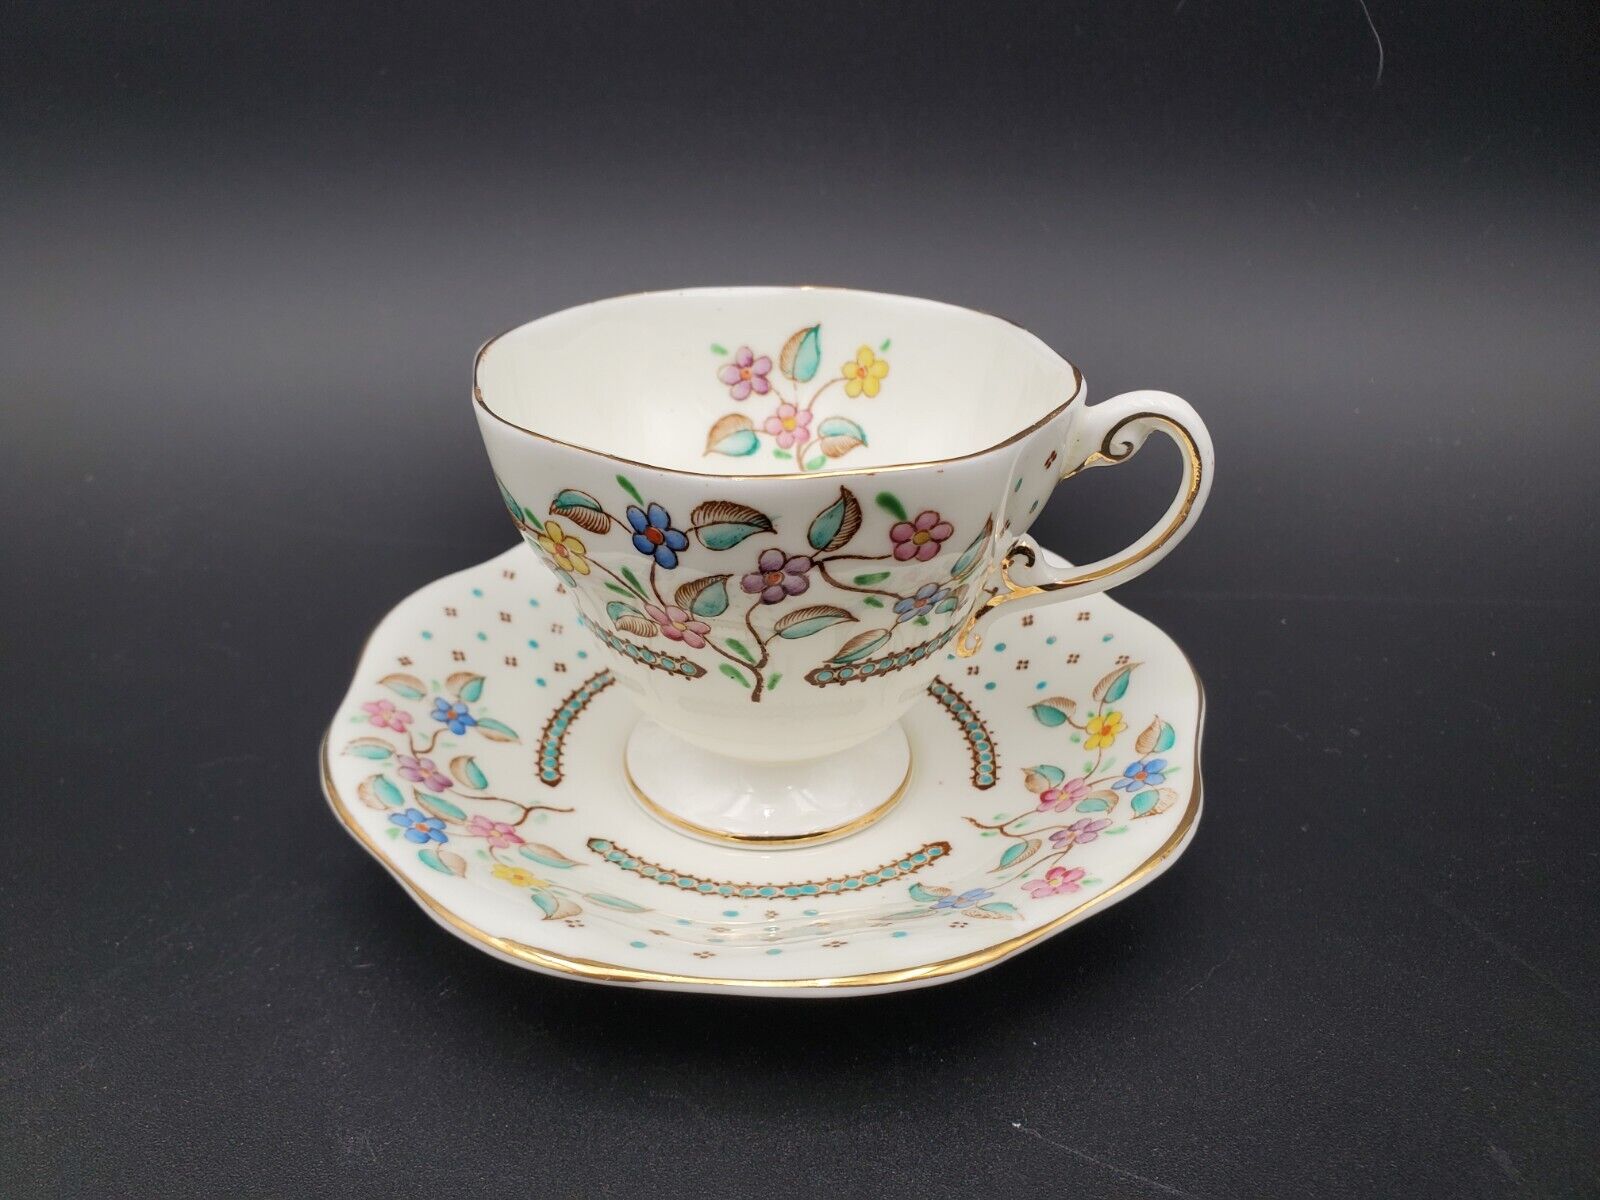 EB & Co Foley English Bone China Teacup And Saucer, Floral, Teal, Gold, PUC